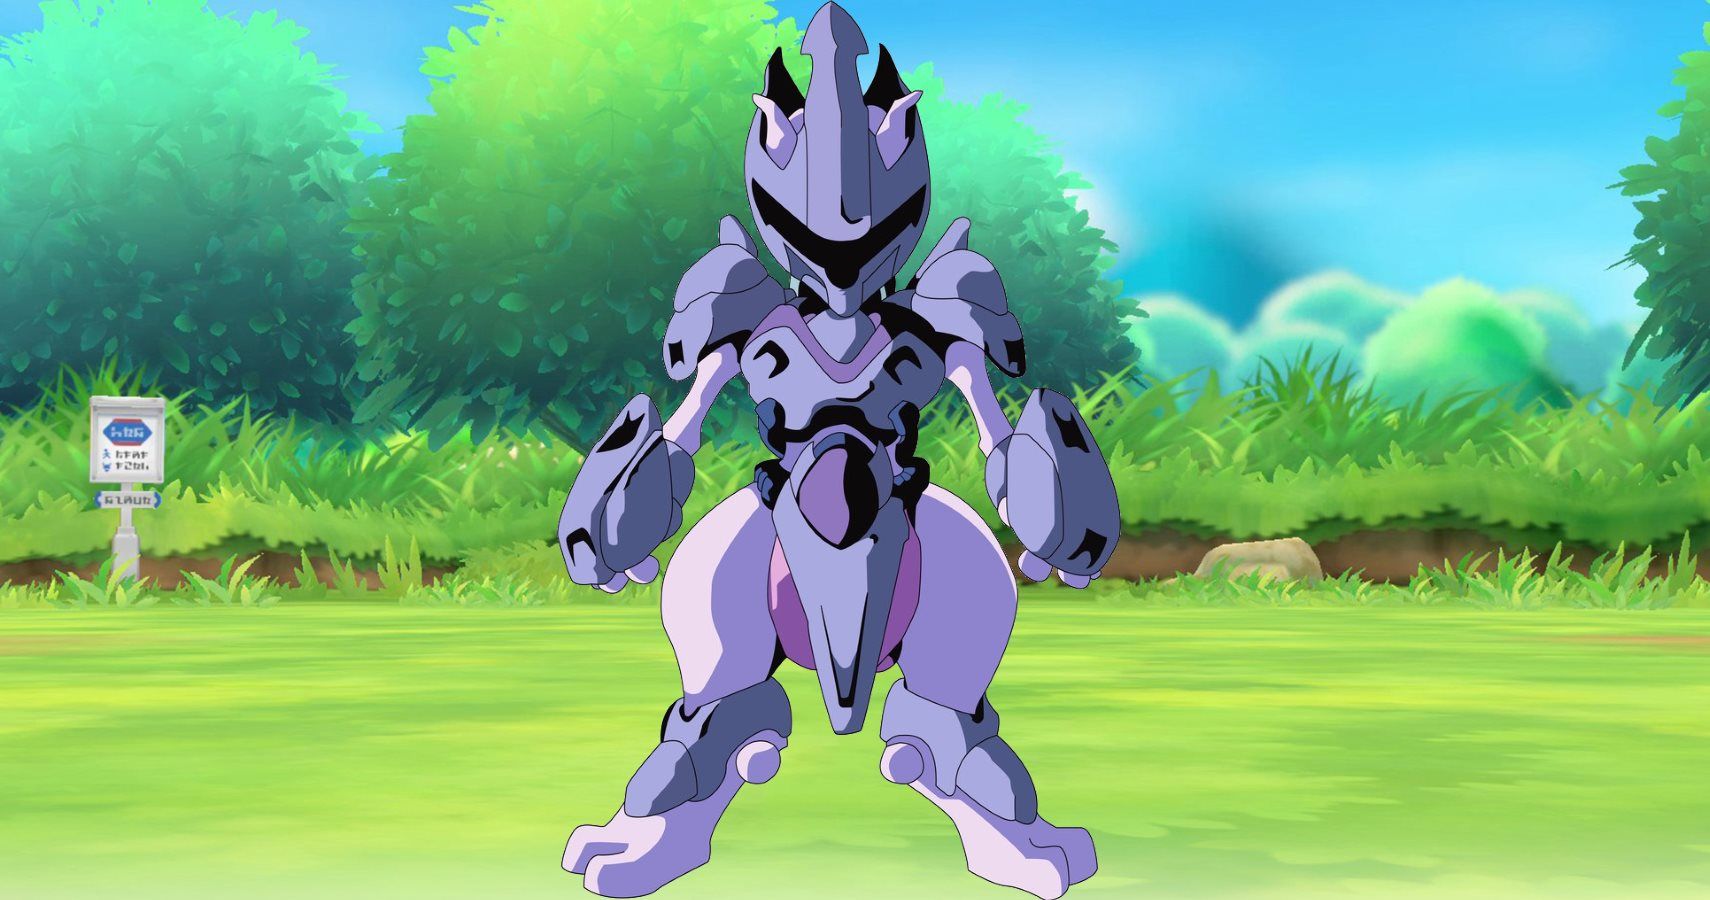 Armored Mewtwo in pokemon go, can we get armored mewtwo in 2022